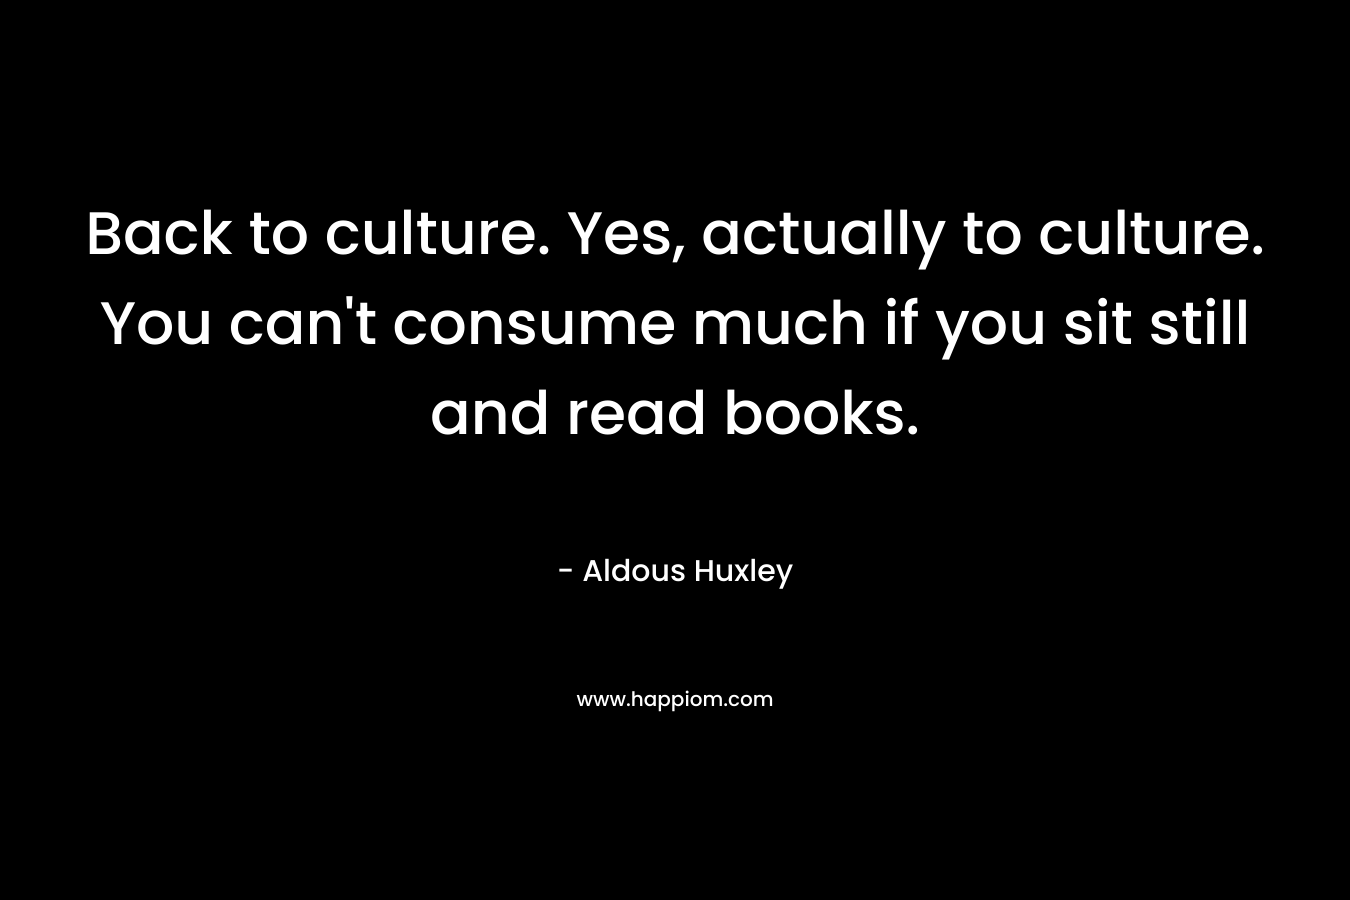 Back to culture. Yes, actually to culture. You can't consume much if you sit still and read books.